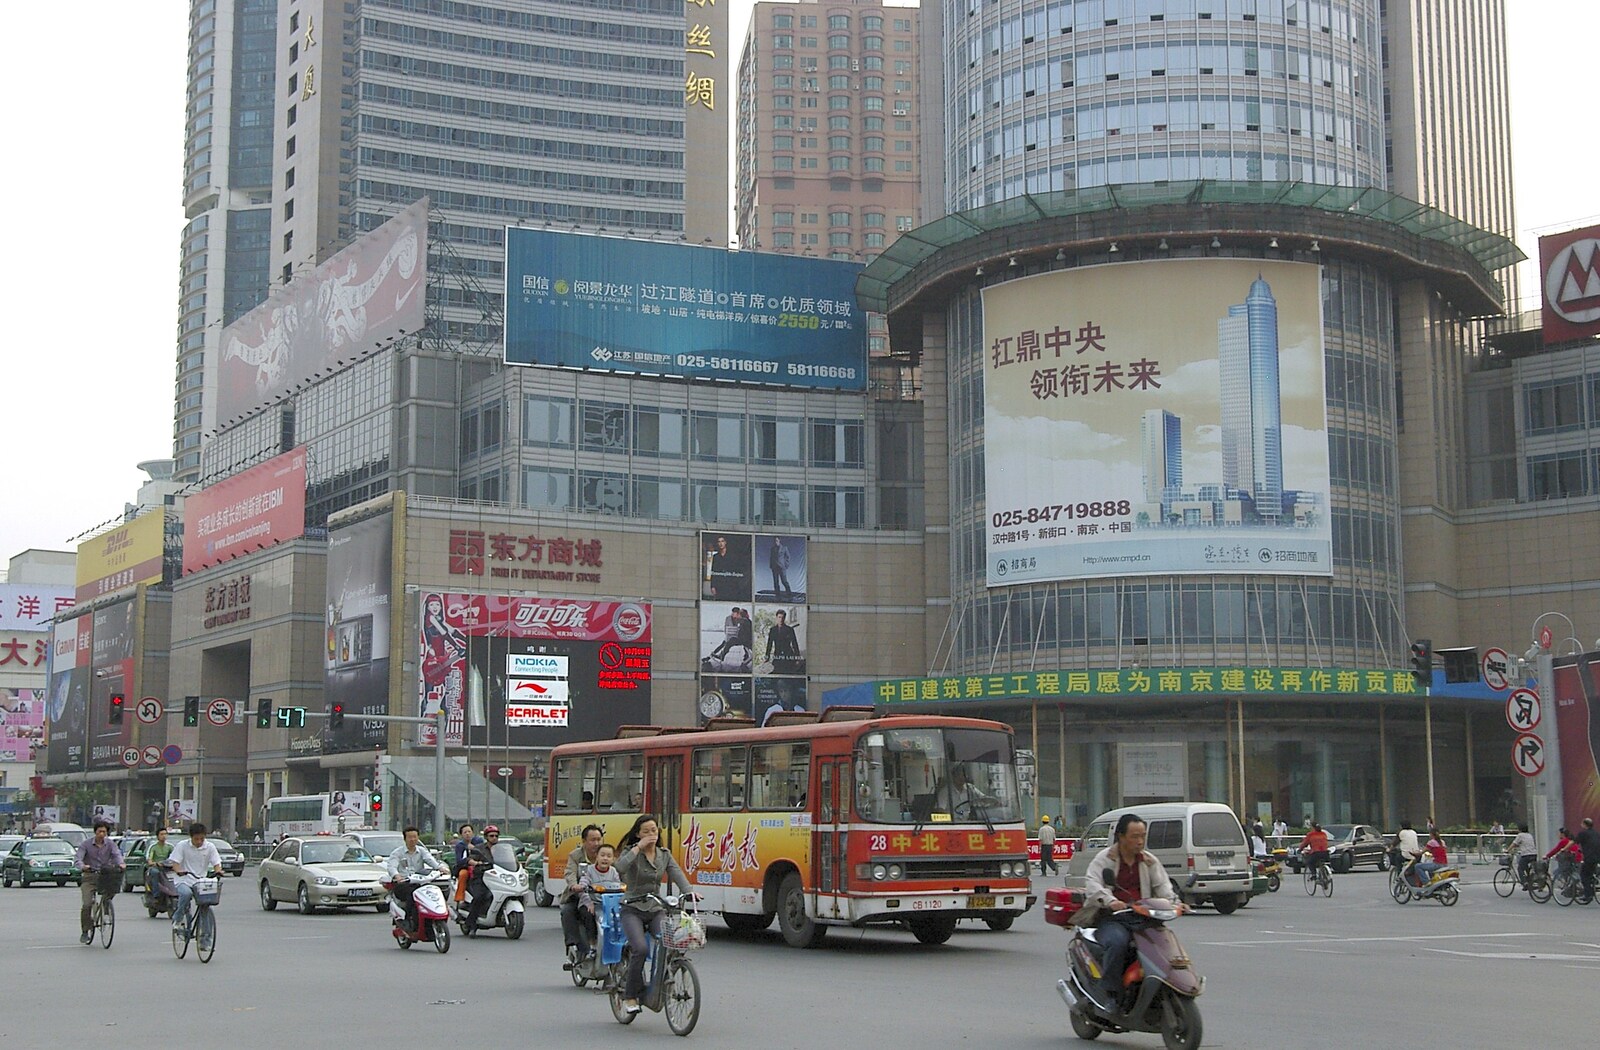 A busy junction from A Few Days in Nanjing, Jiangsu Province, China - 7th October 2006